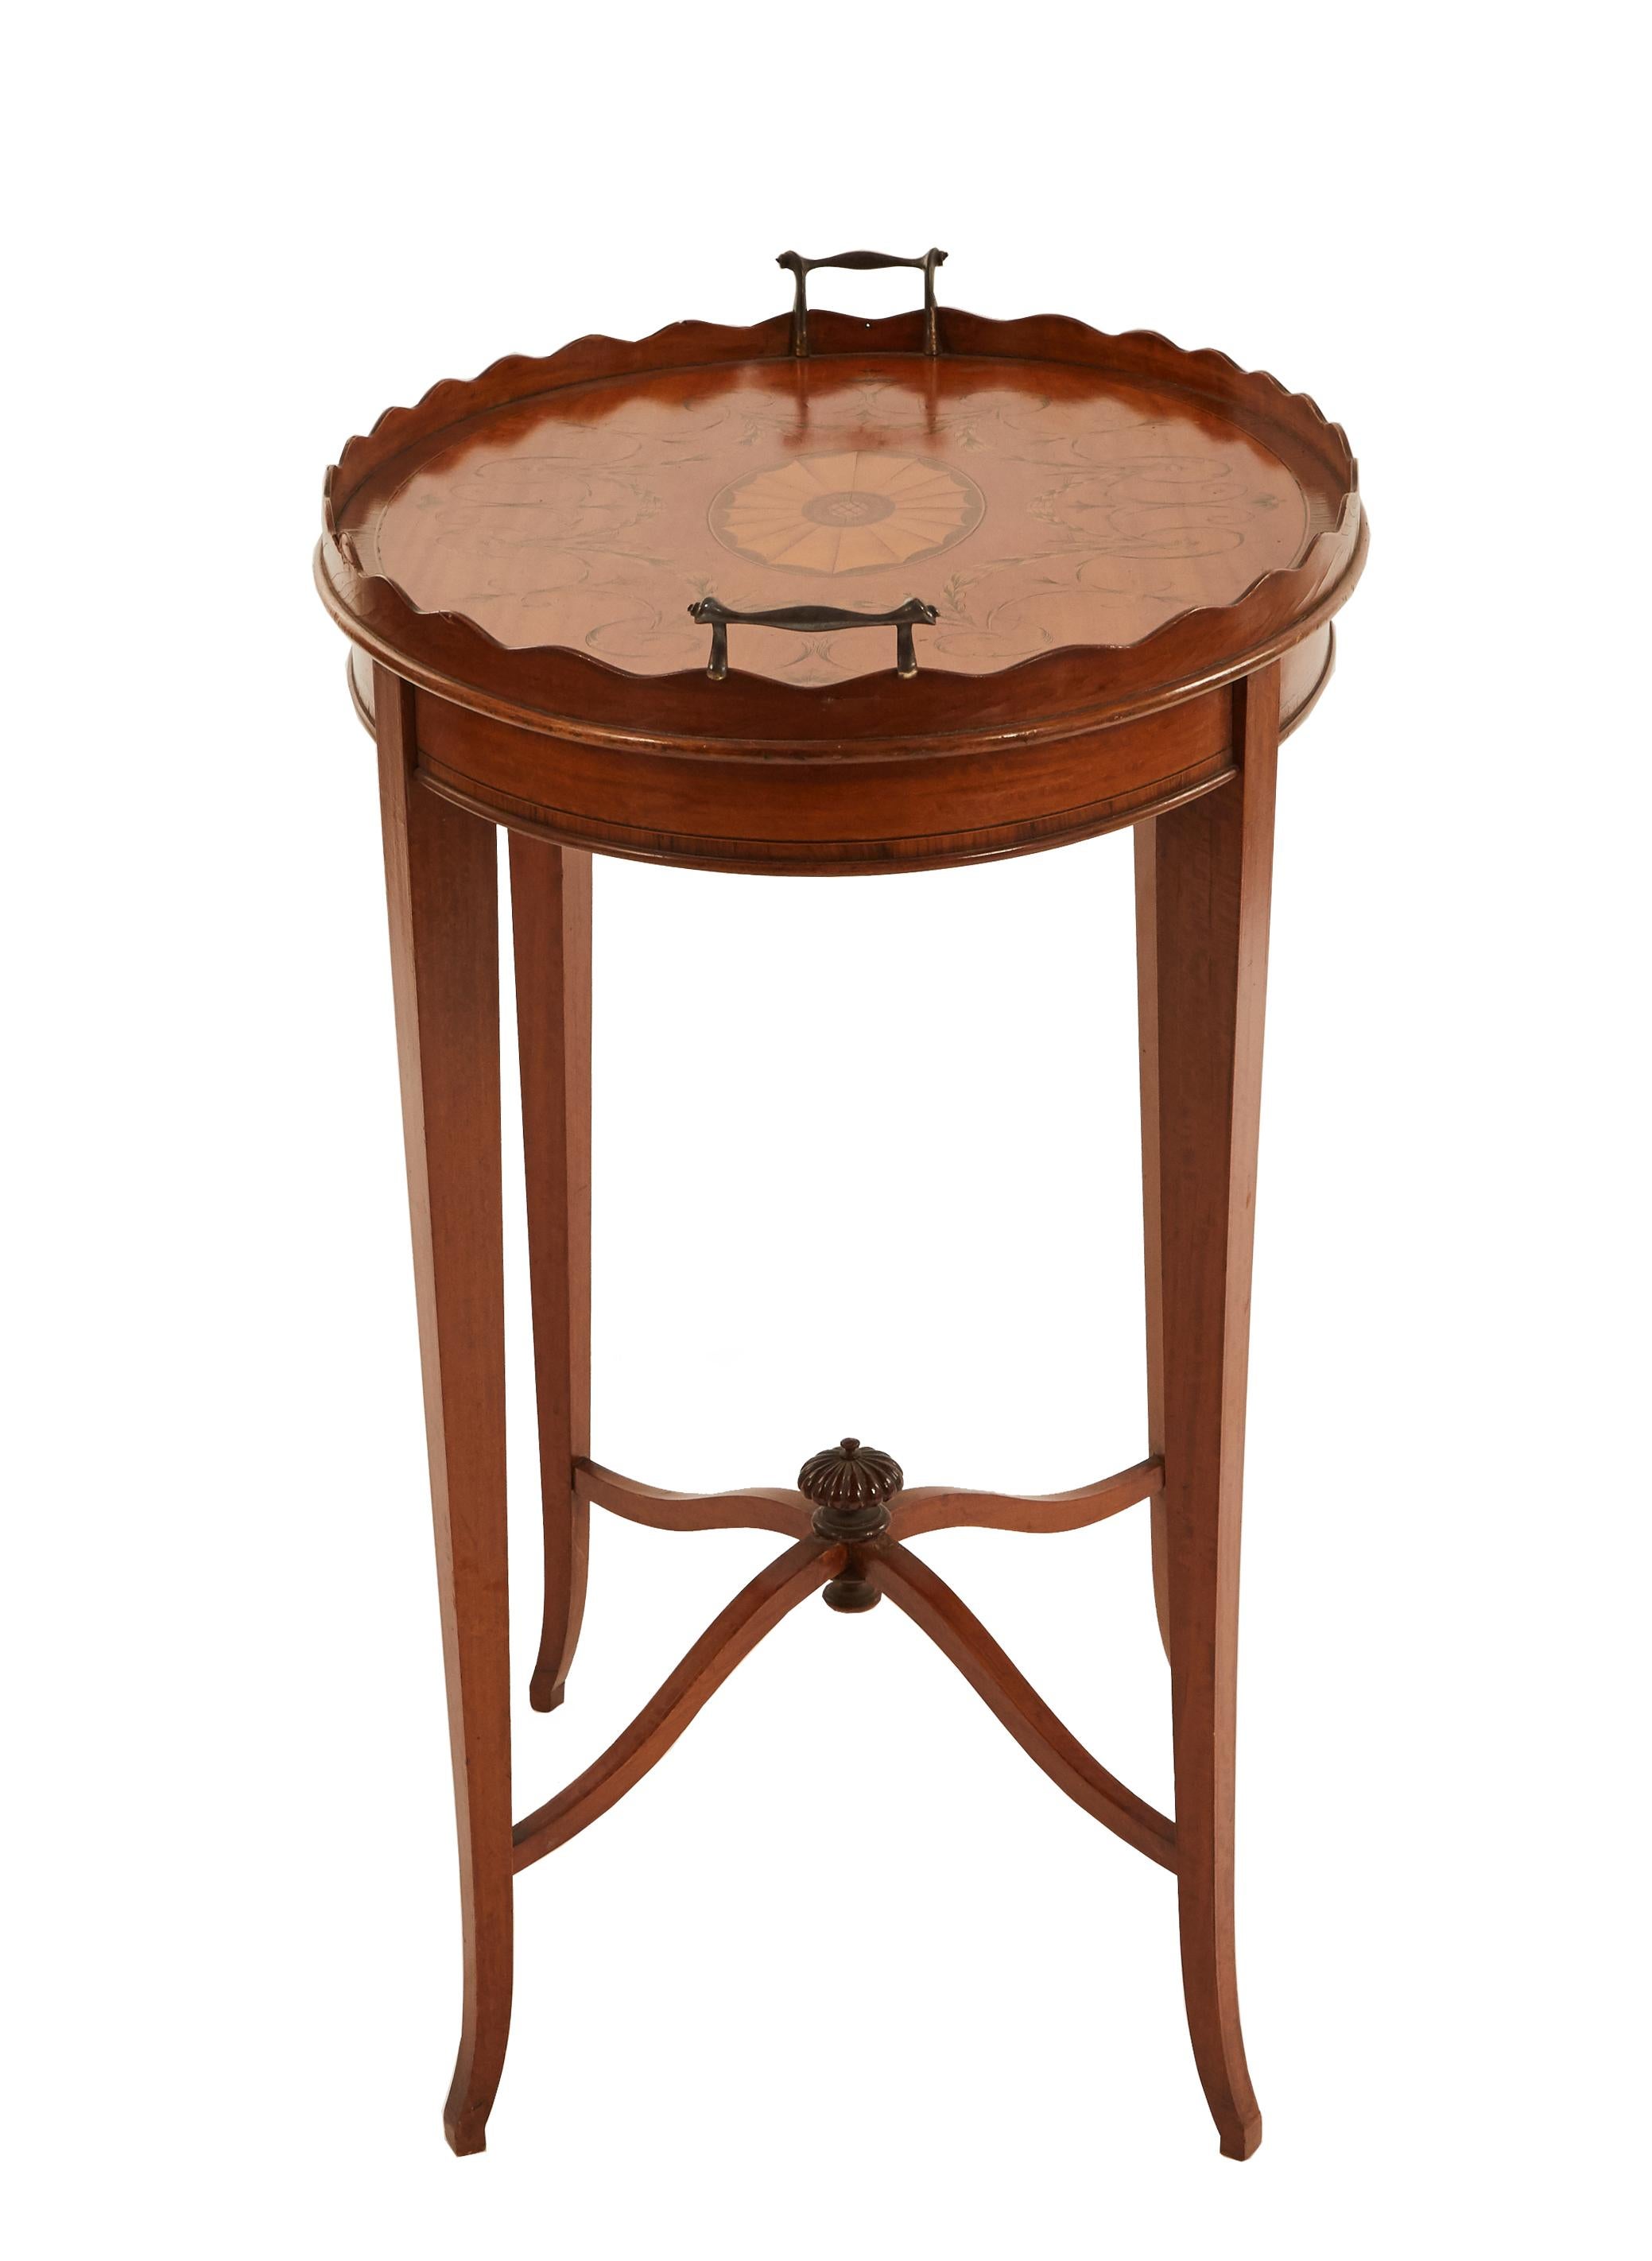 19th century English Adam style satinwood oval end table with inlaid medallion on top and scalloped gallery with silver handles and a stretcher supporting finial.